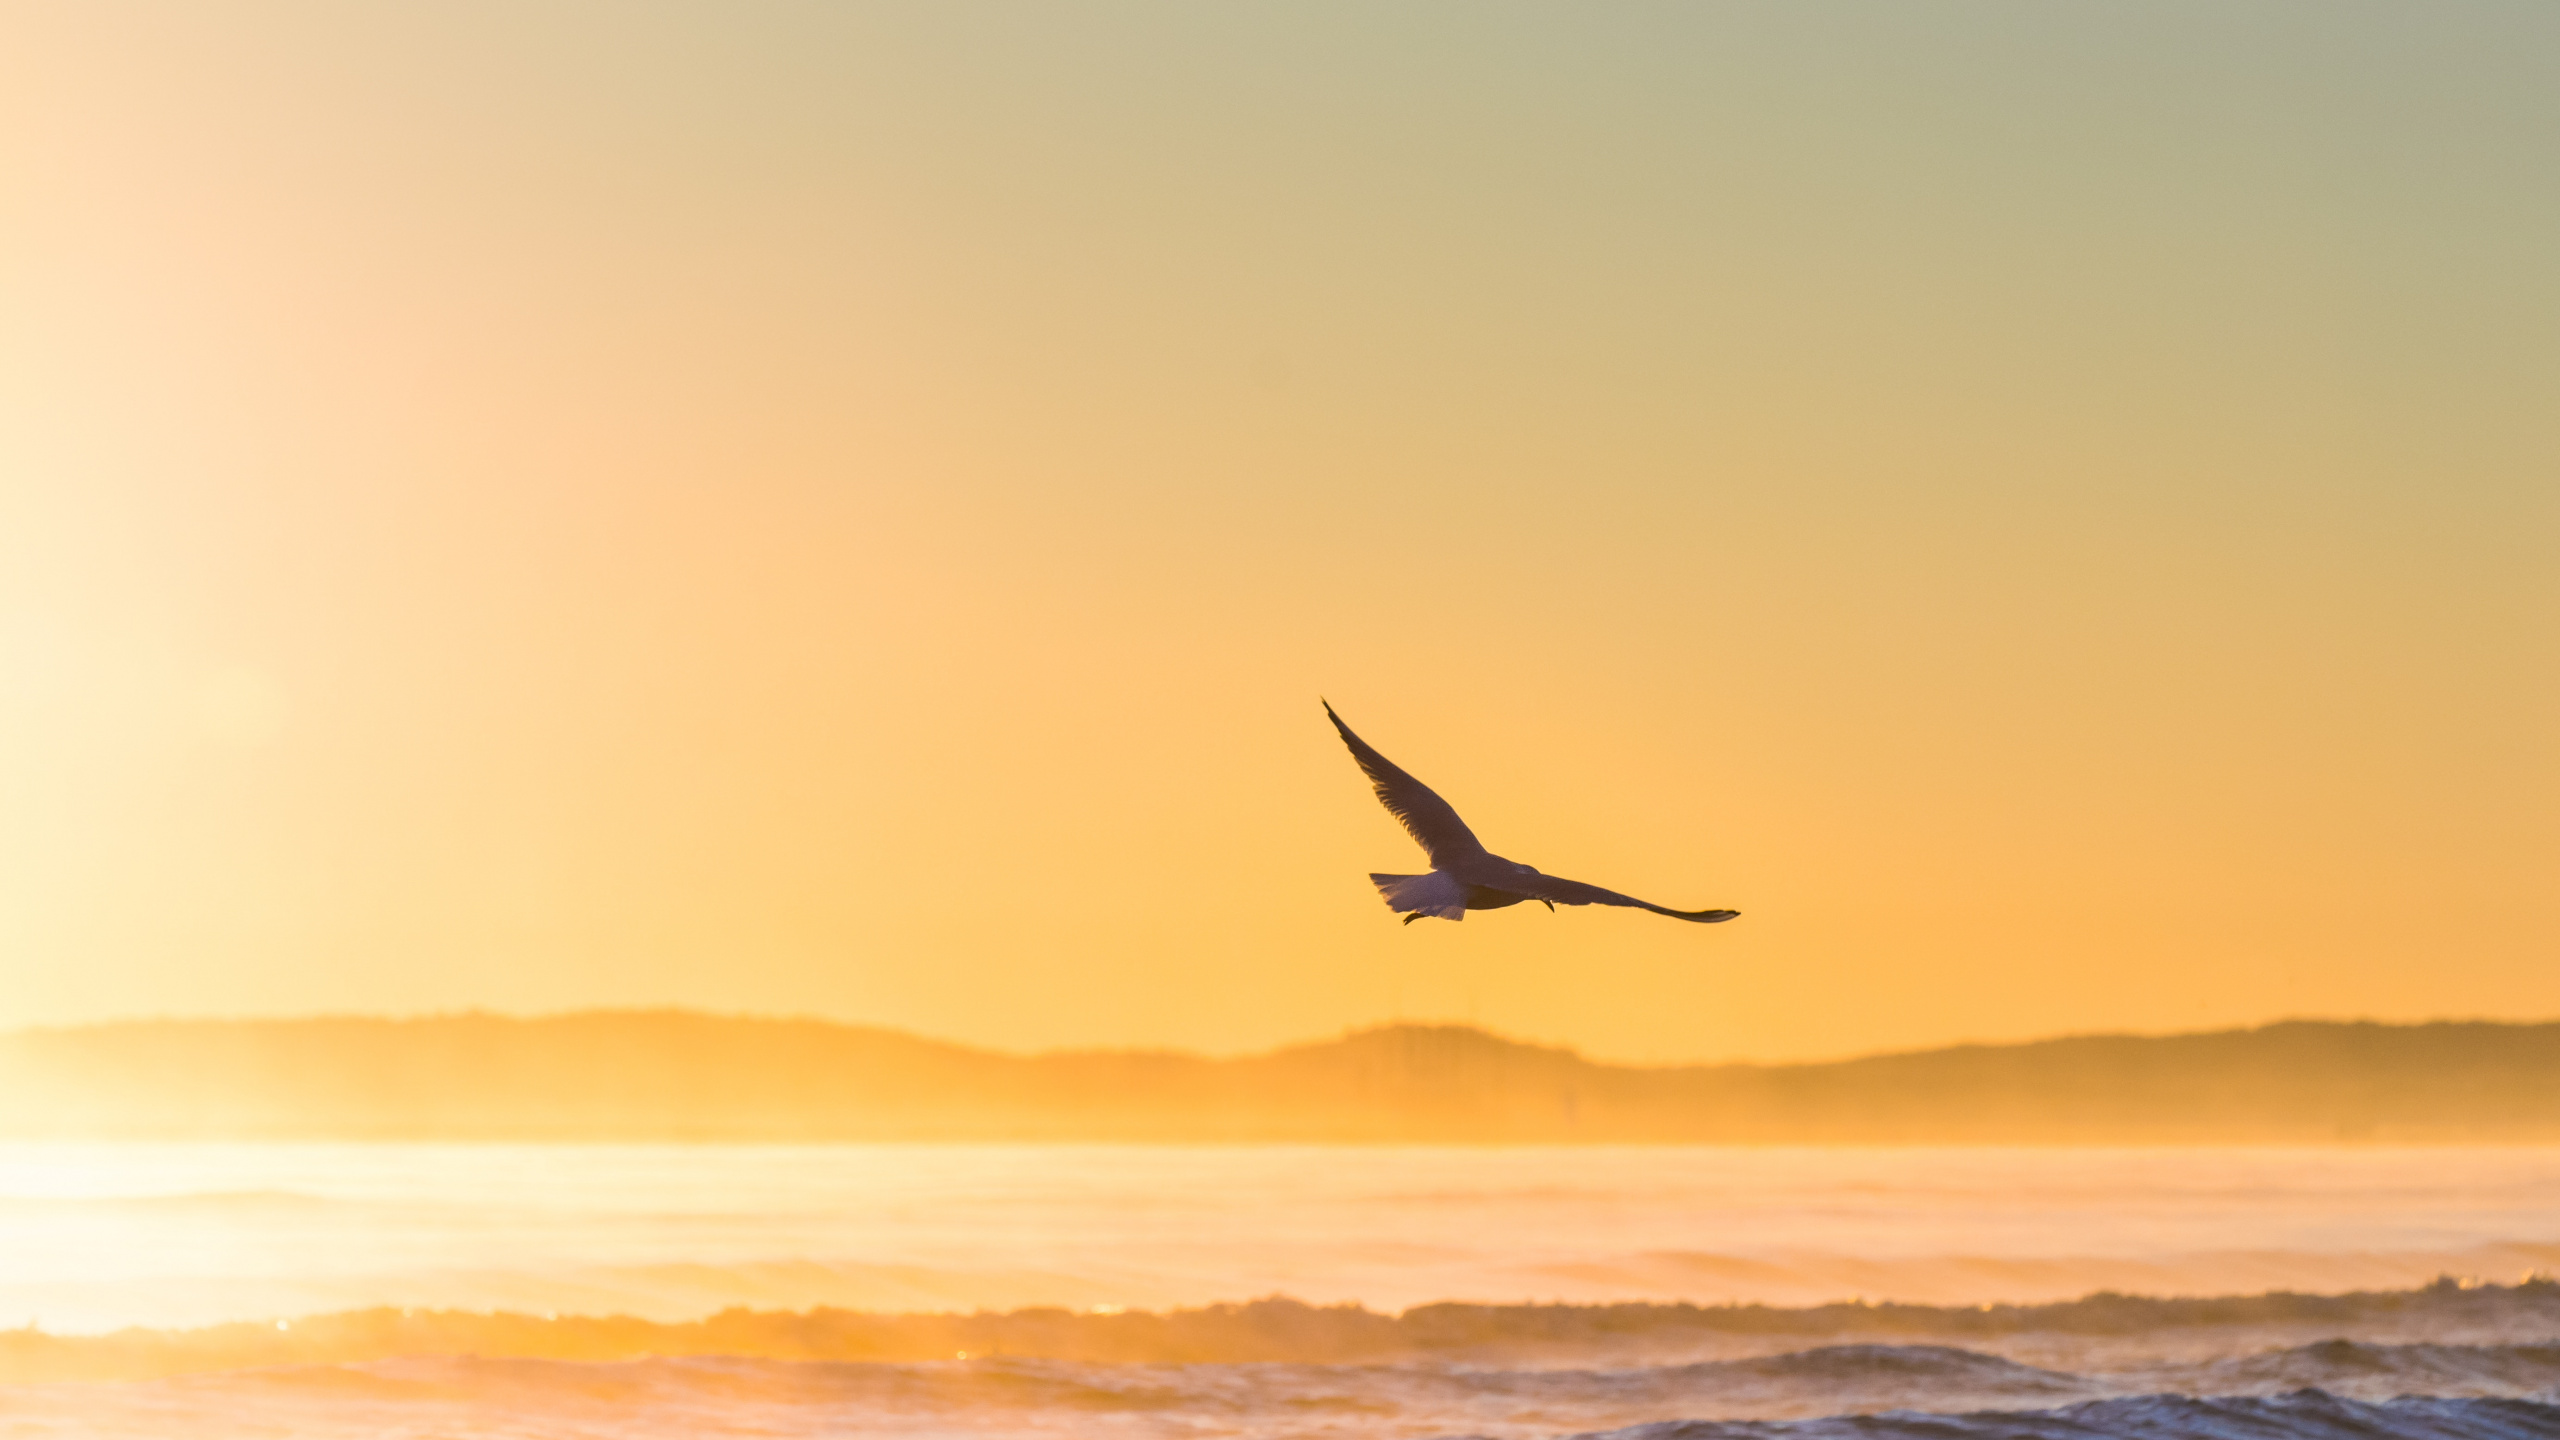 Bird Flying Over The Sea During Sunset. Wallpaper in 2560x1440 Resolution